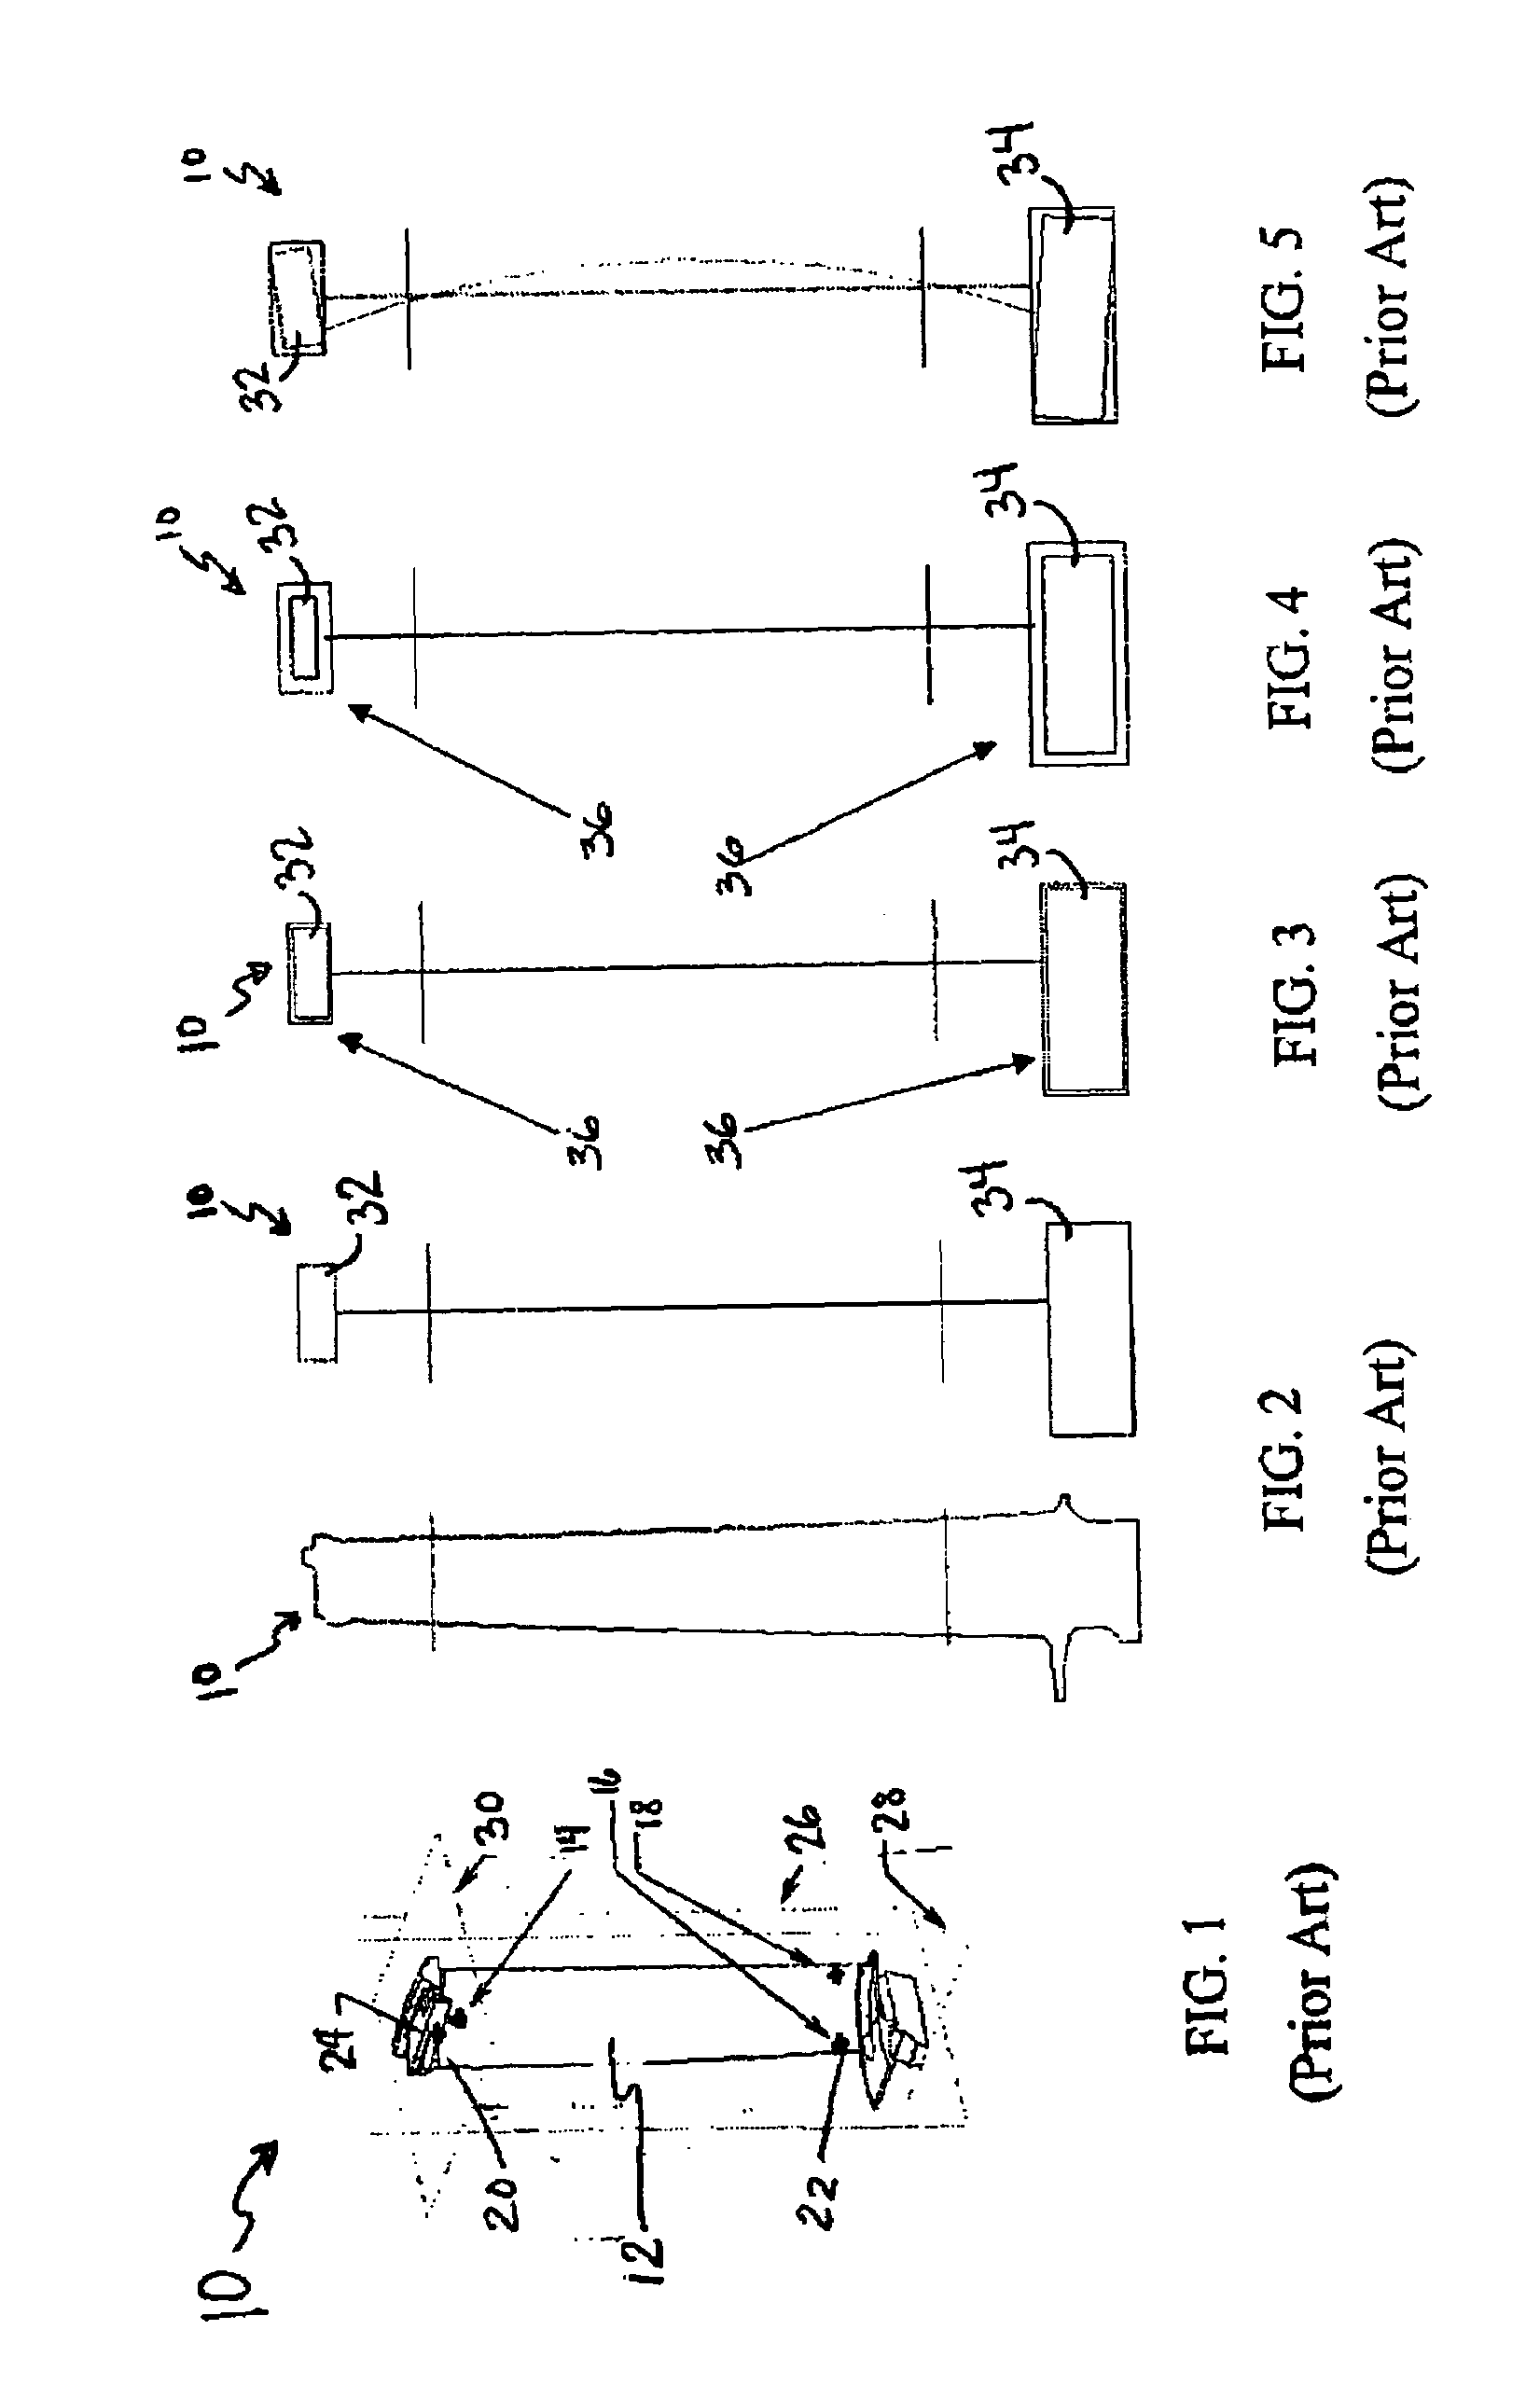 System and method for verifying the dimensions of airfoils